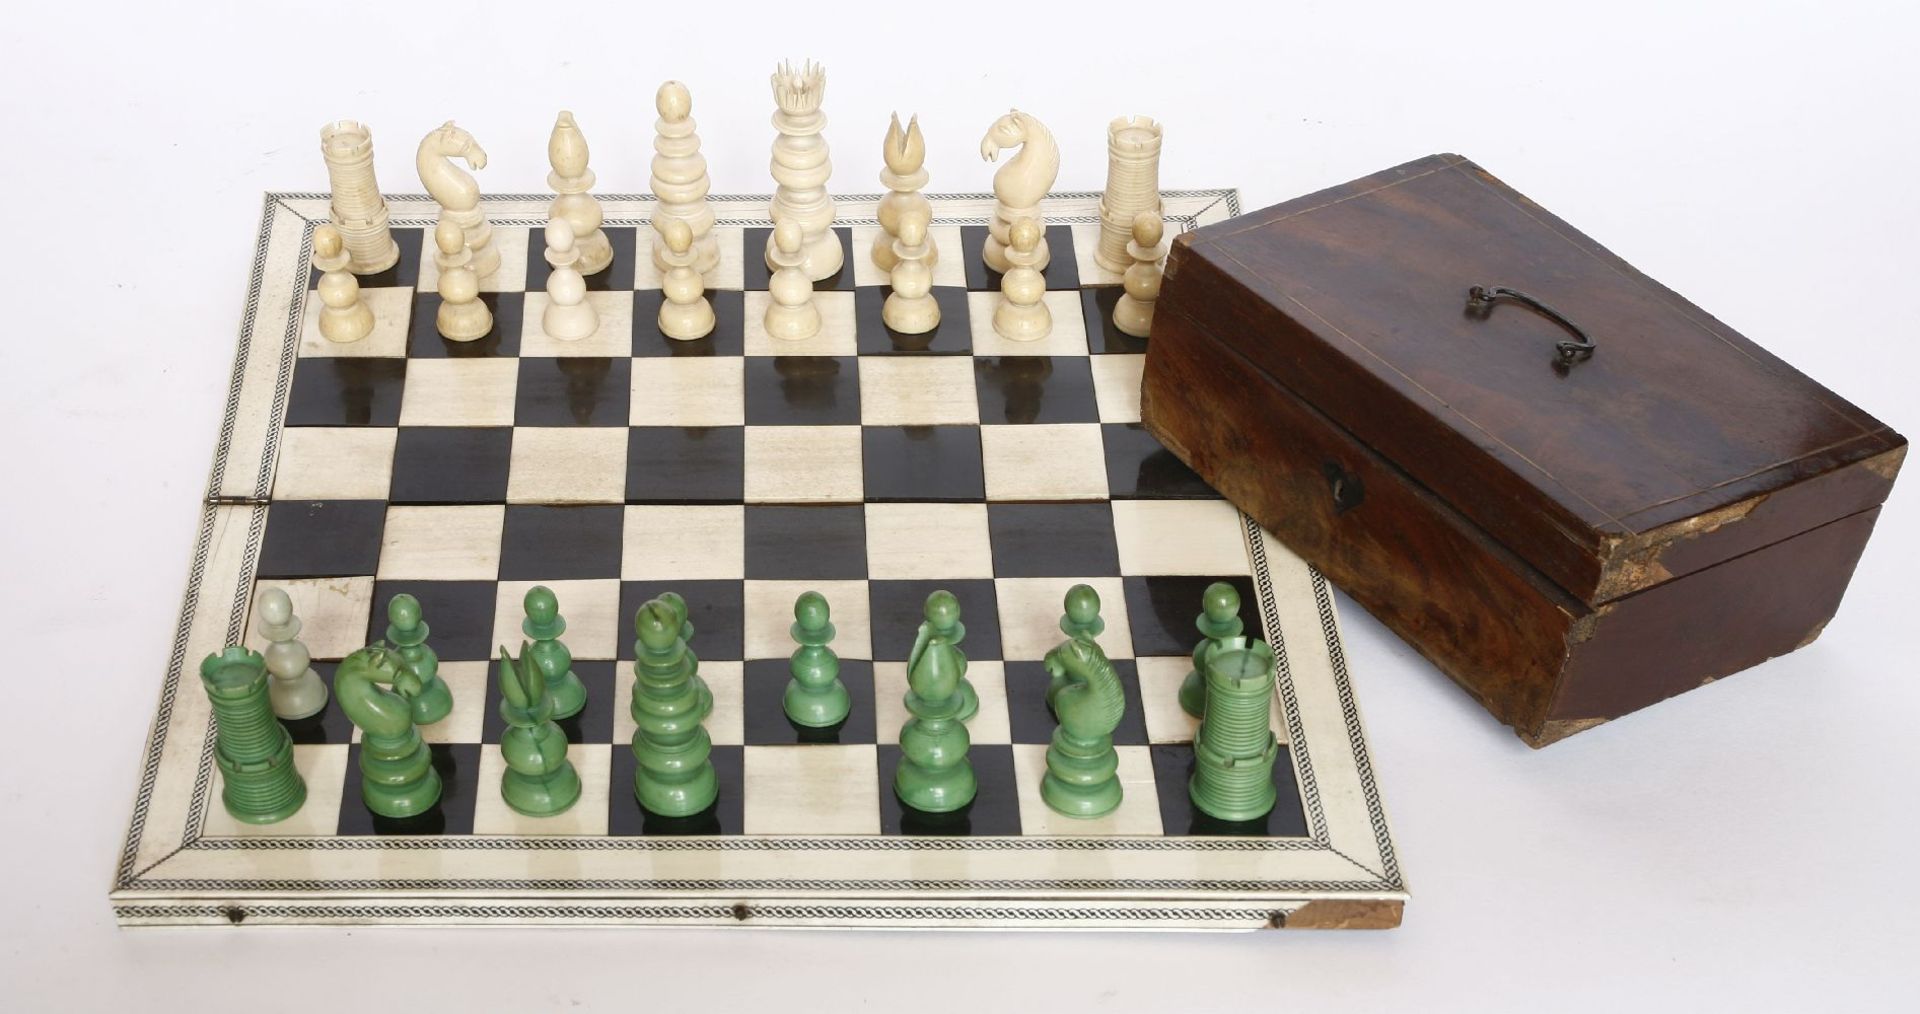 A Chinese ivory chess set,mid-19th century, with engine turned and carved decoration, red stained - Image 2 of 2